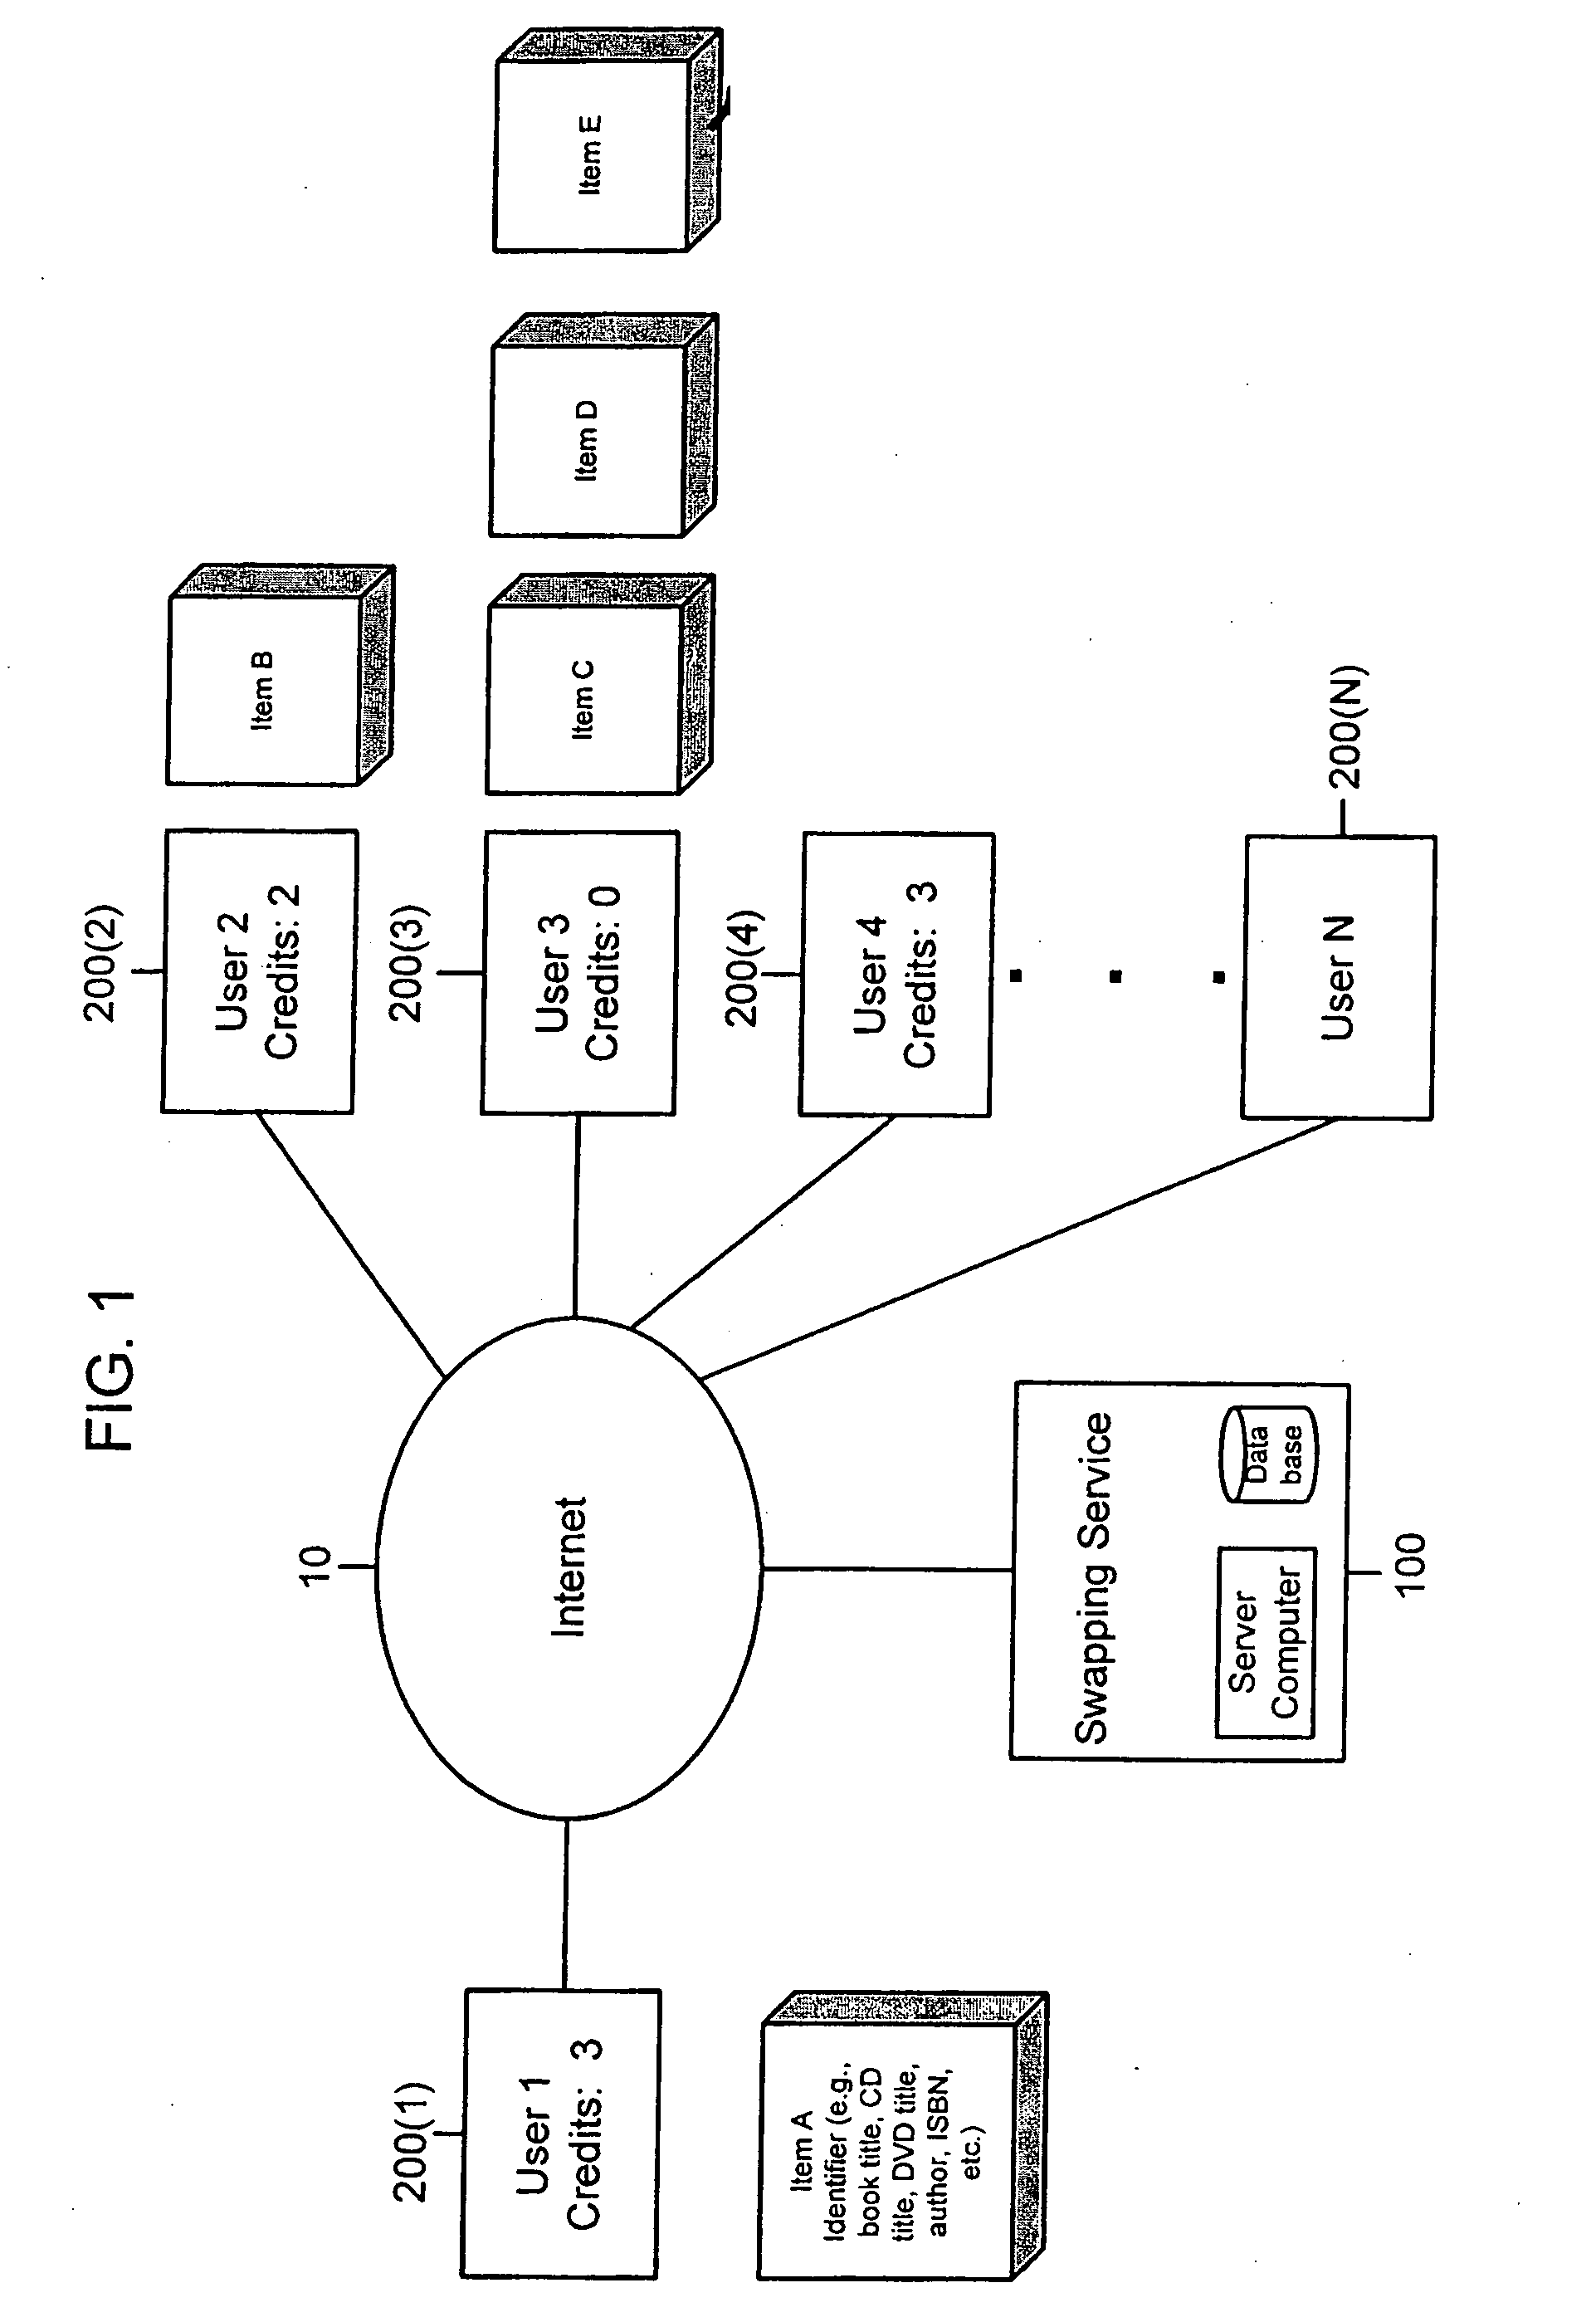 System and method for swapping of tangible items